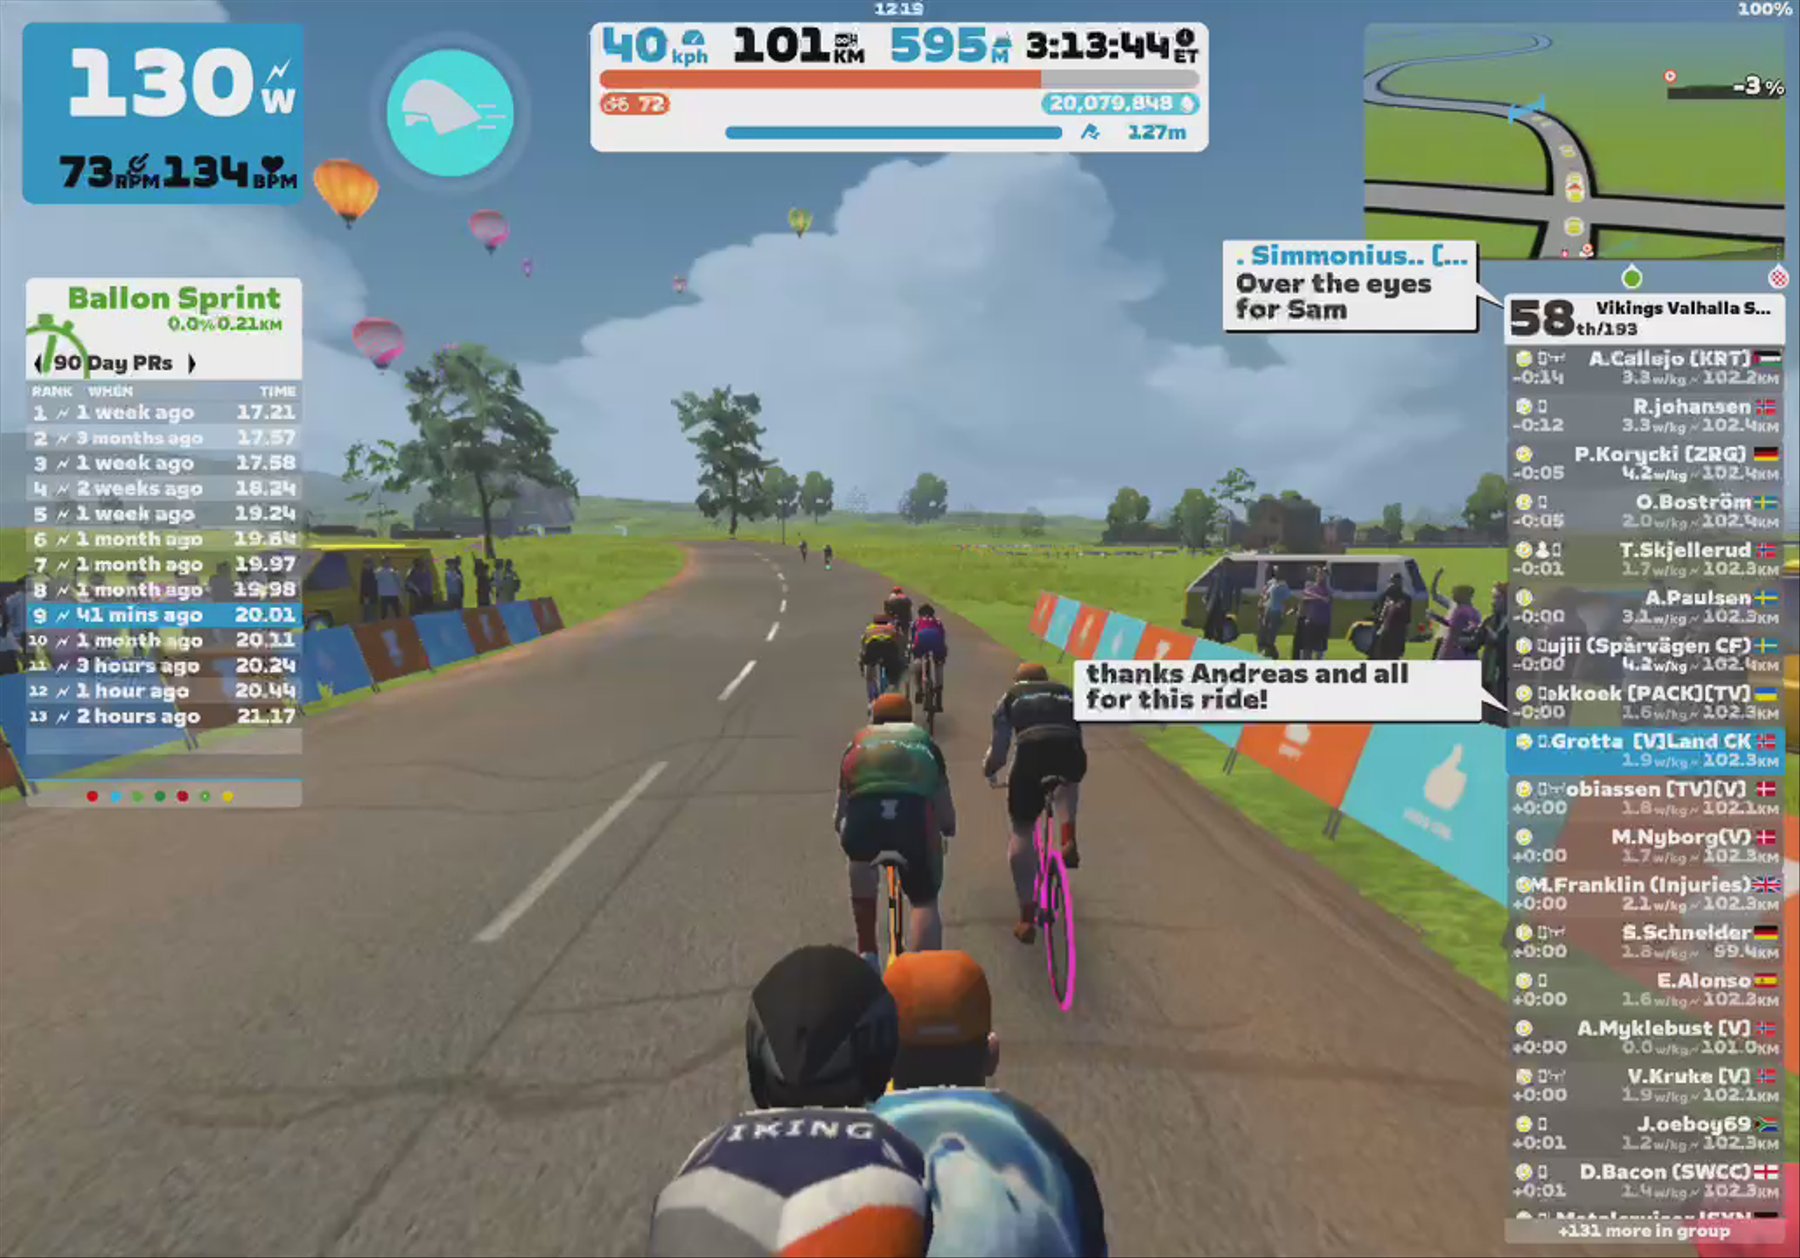 Zwift - Group Ride: Vikings Valhalla Sunday Skaal ride (D) on Douce France in France